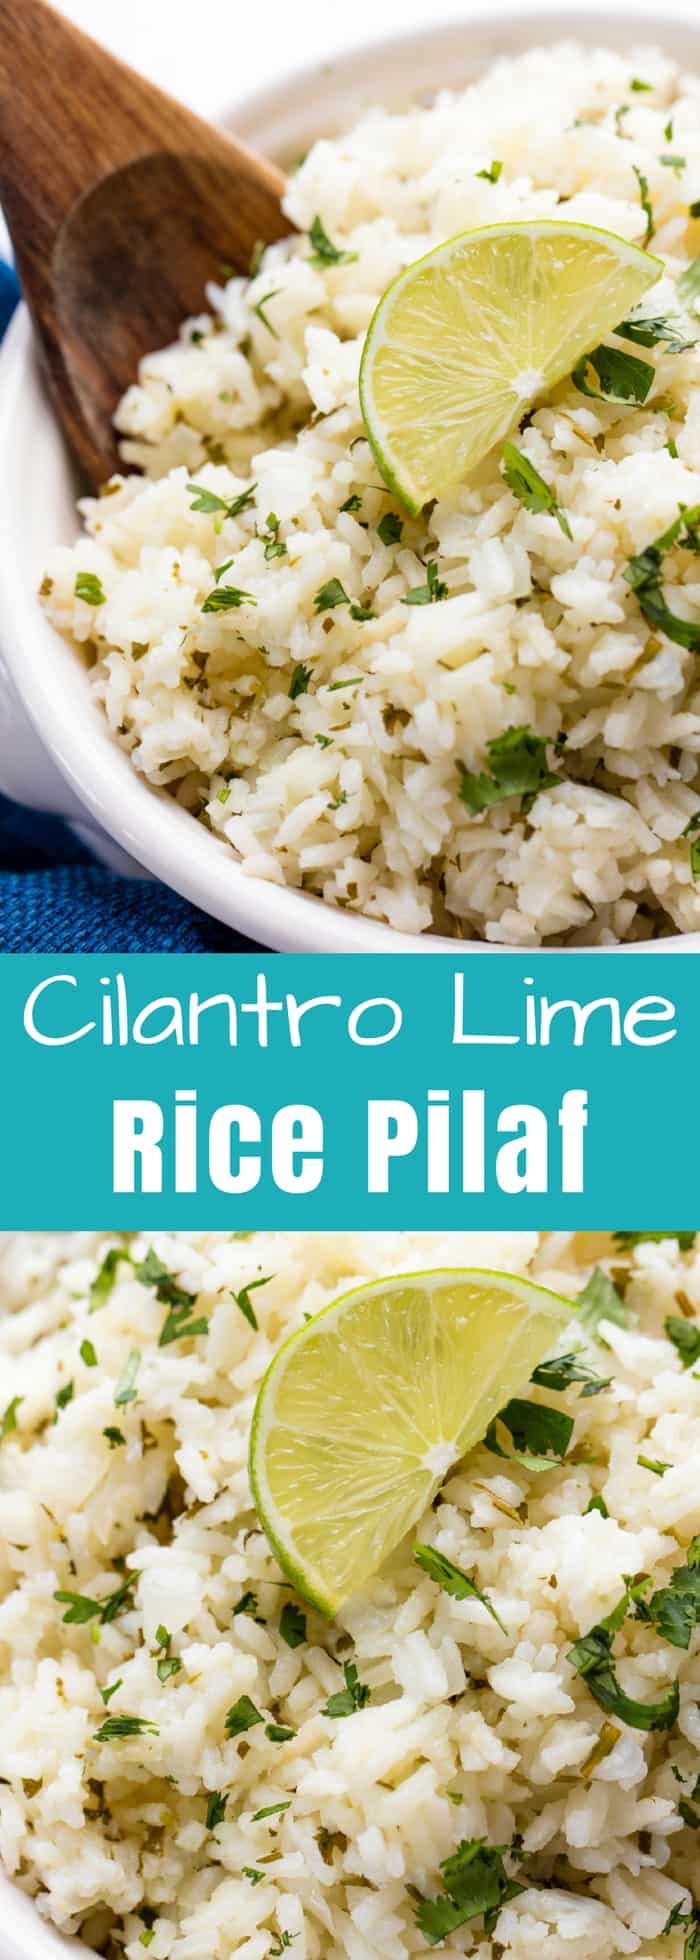 Cilantro Lime Rice Pilaf is an easy side dish that goes perfectly with any Mexican-inspired meal. It is full of zippy lime flavor and cilantro. 